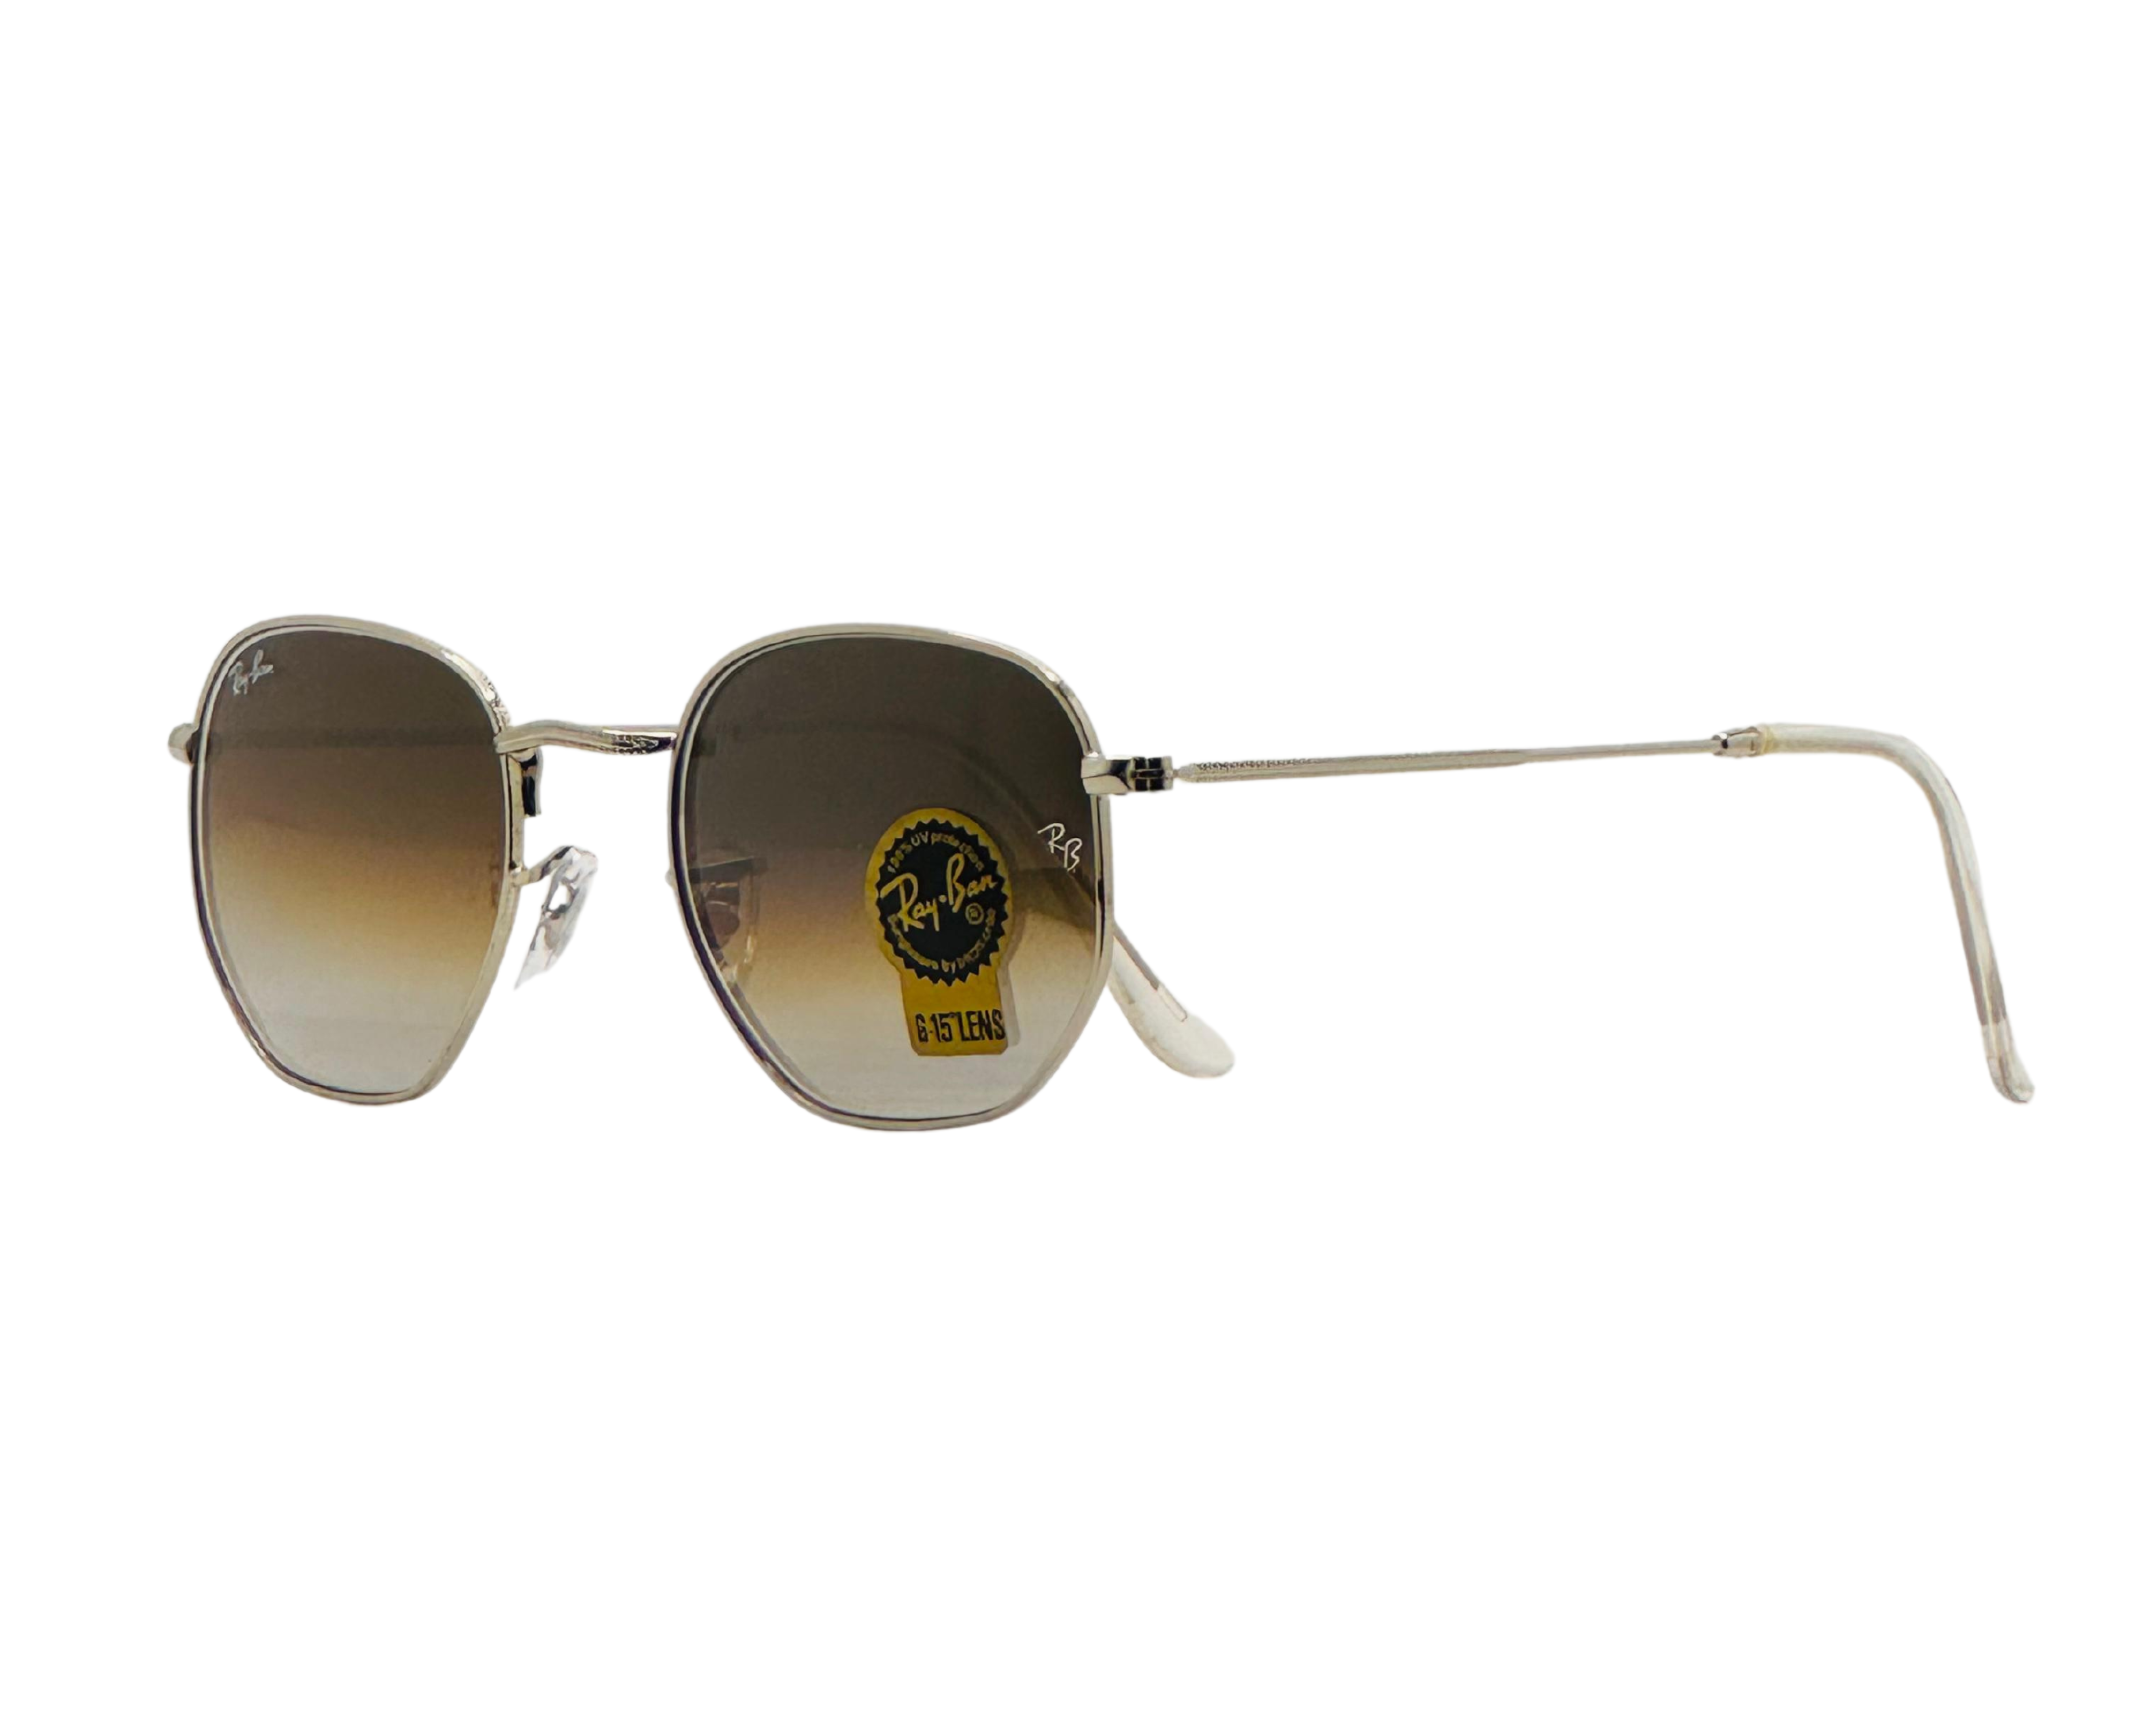 NS Deluxe - 3548 - Silver/Brown - Sunglasses